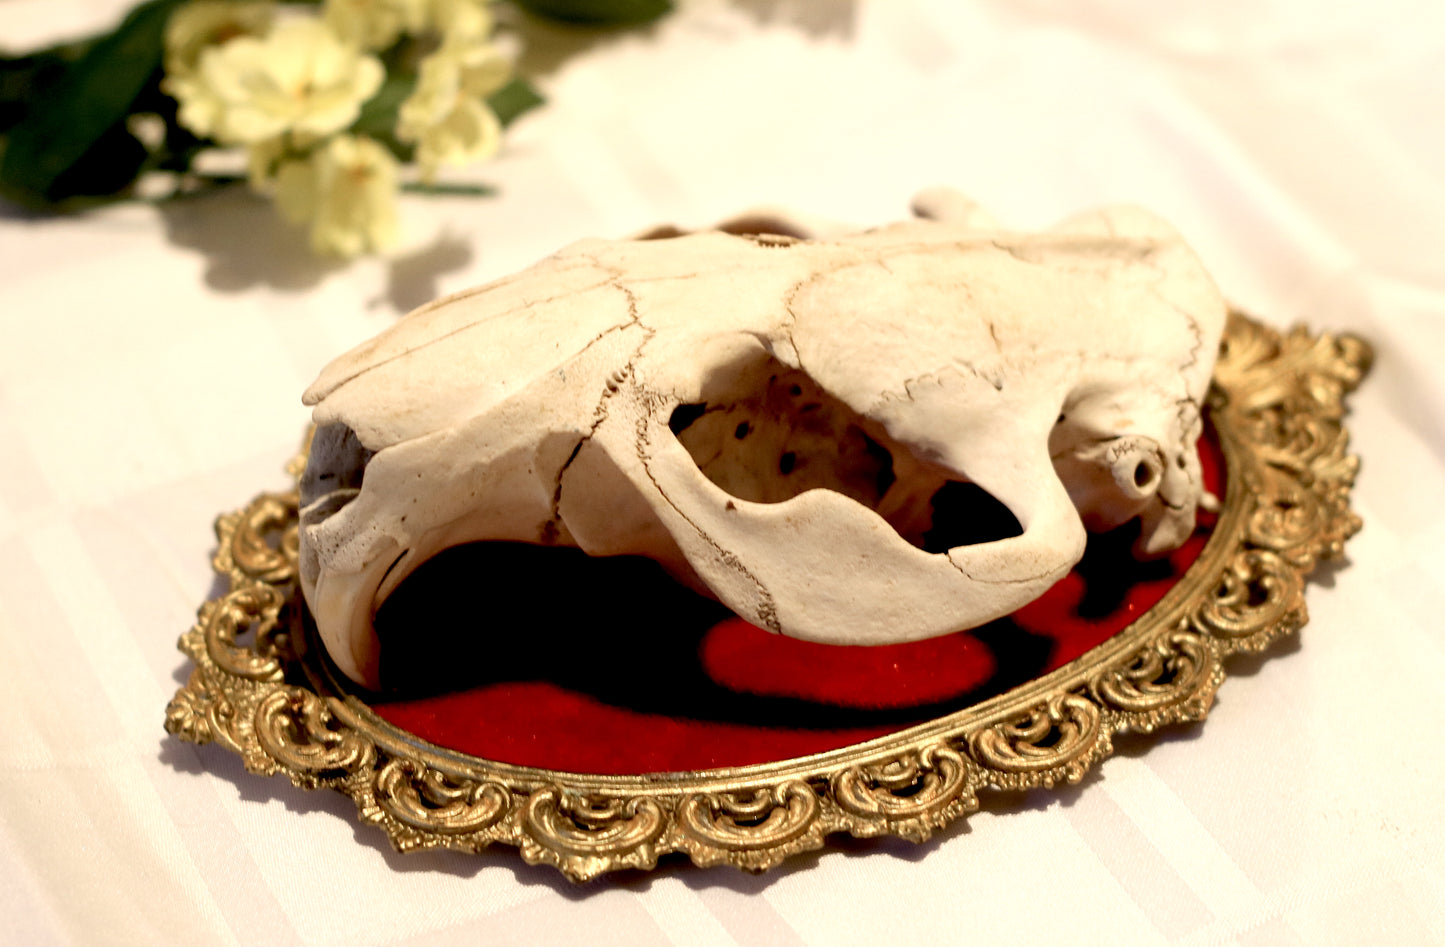 Beaver Skull in an Antique Frame | Real Taxidermy Goblincore | Gothic and Witch Home Decor | Goblincore Holiday Oddities and Curiosities